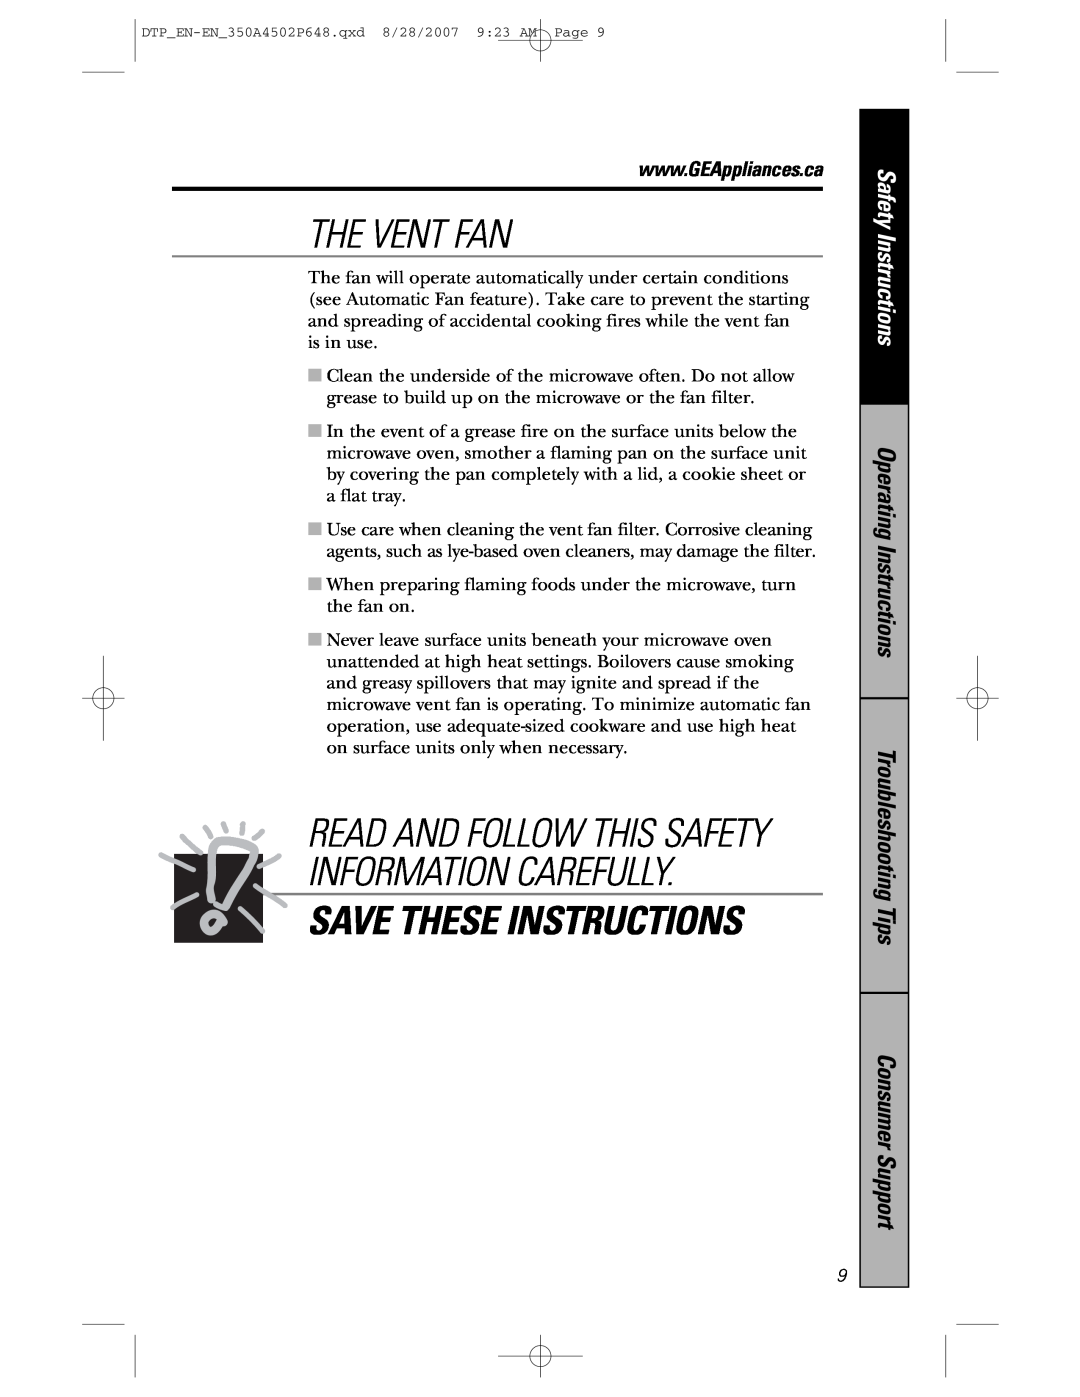 GE pvm1870 The Vent Fan, Save These Instructions, Read And Follow This Safety Information Carefully, Safety Instructions 